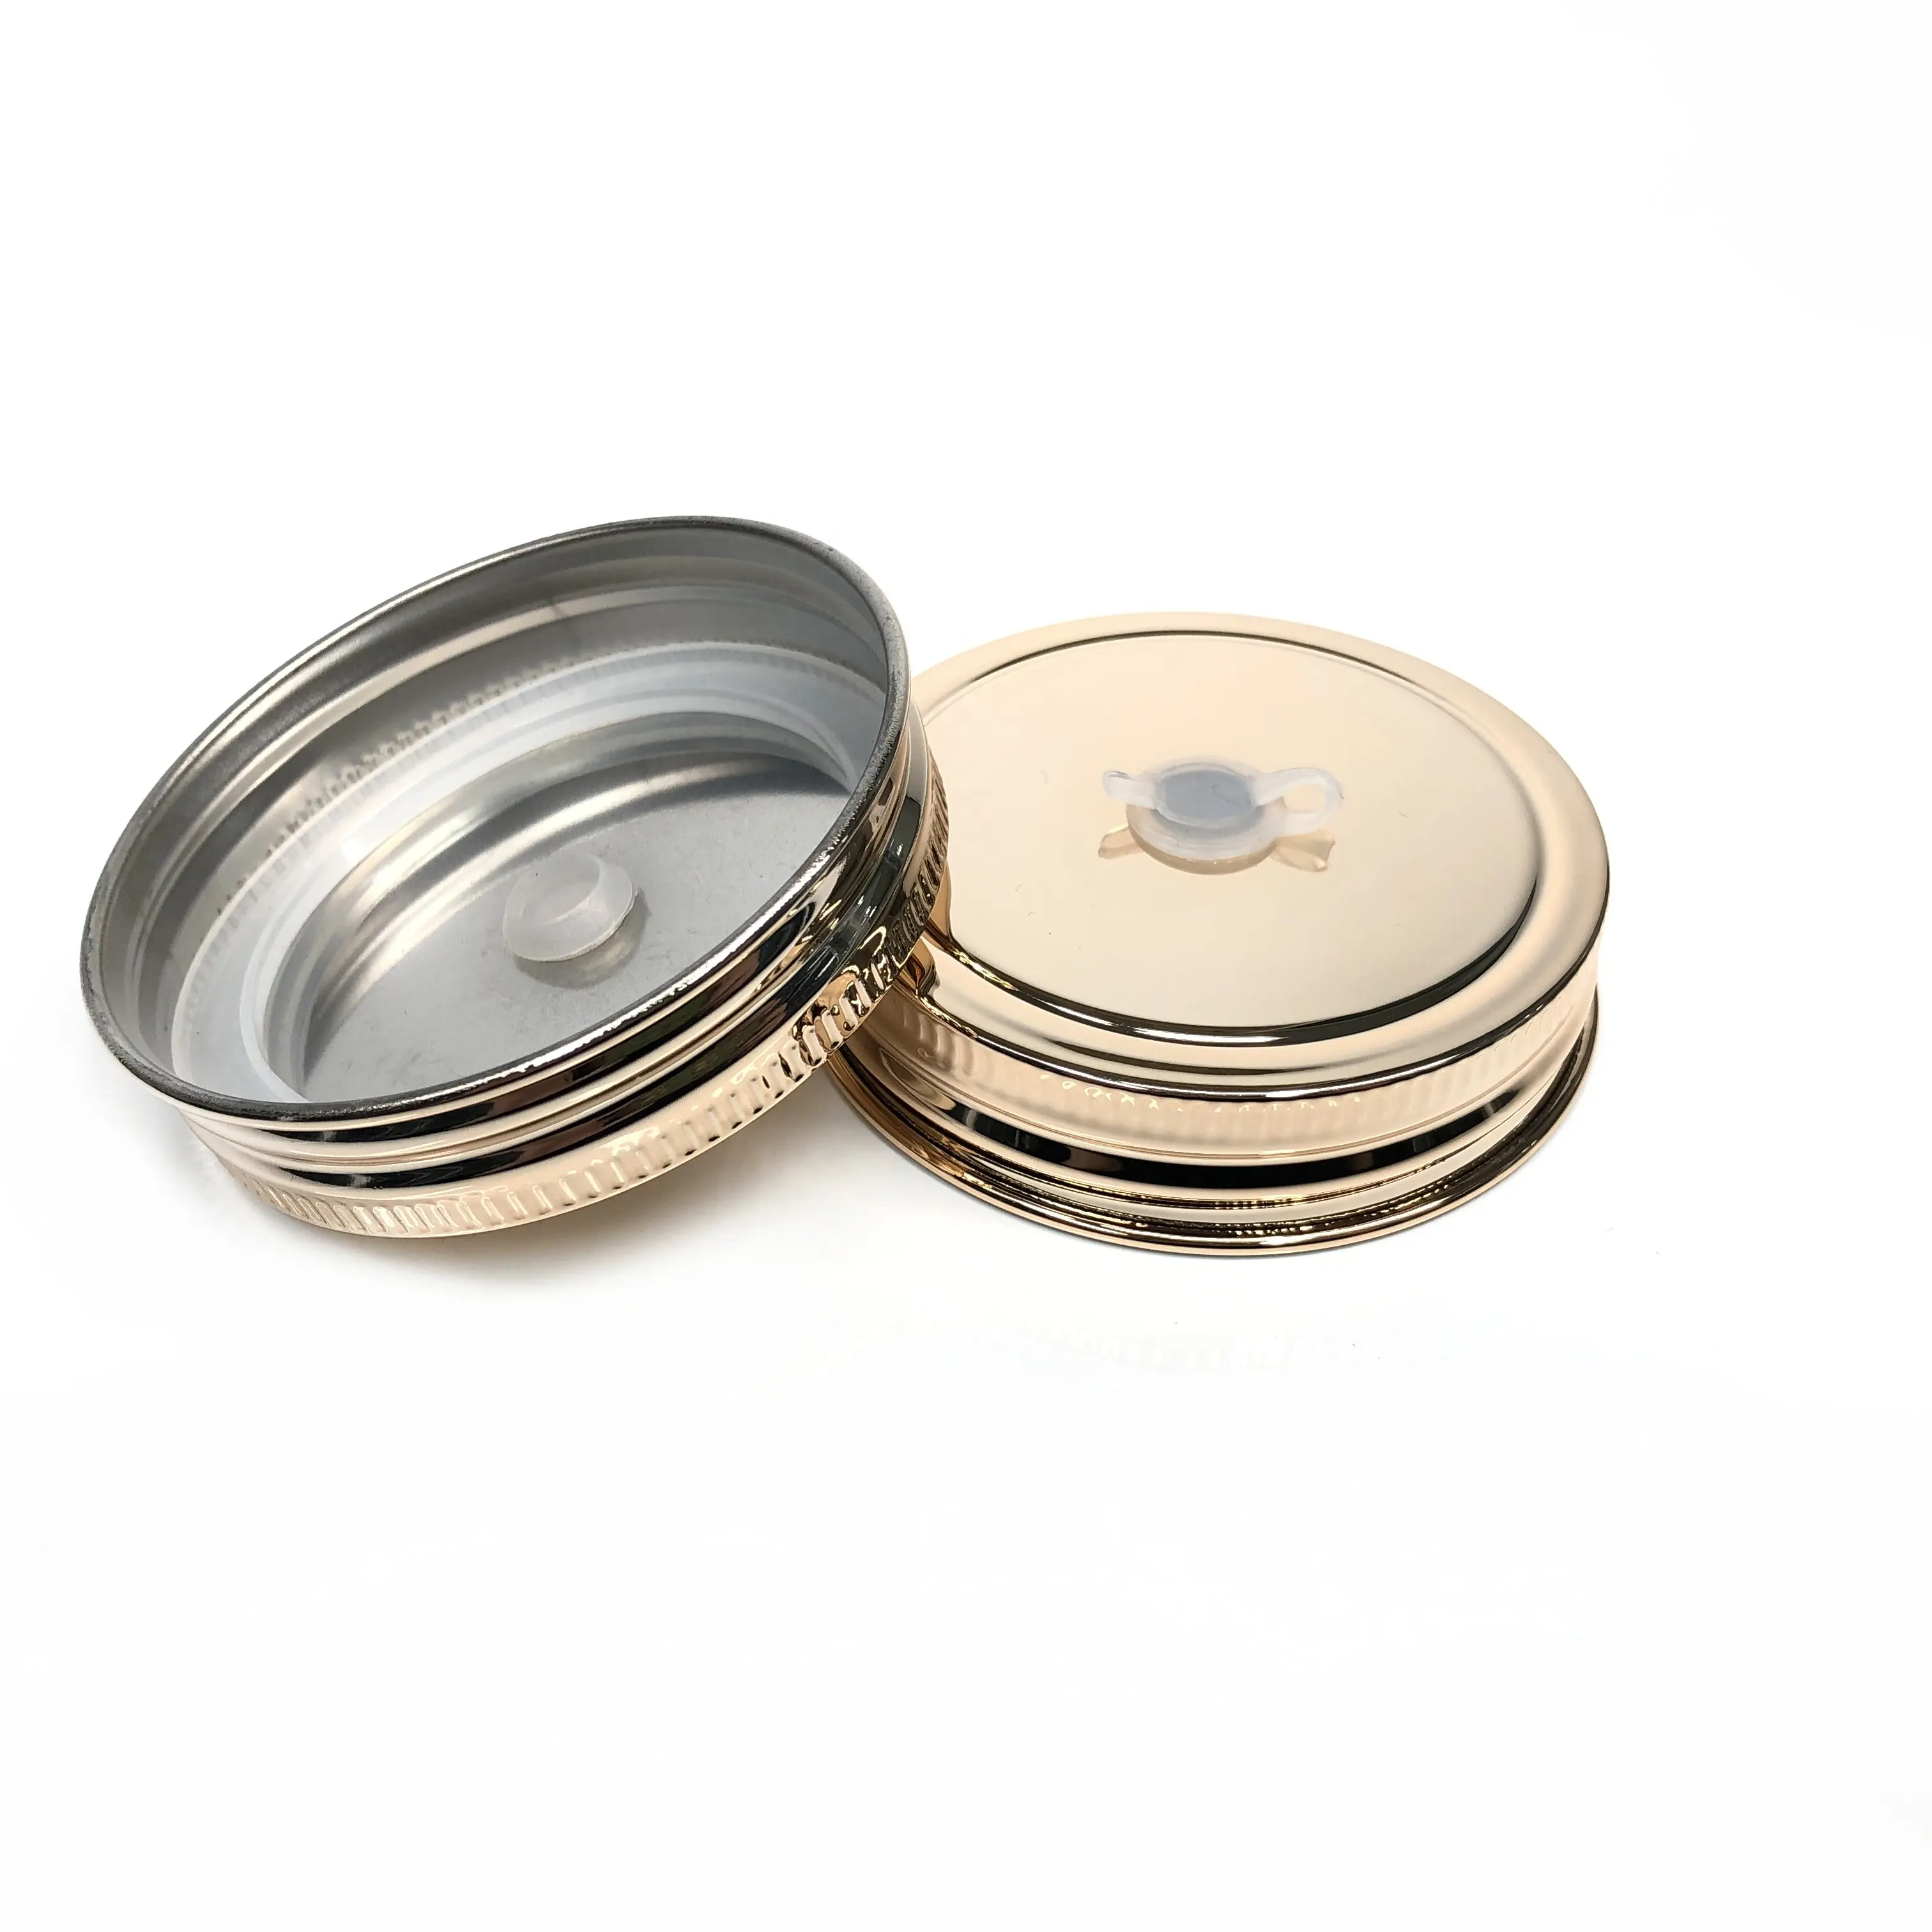 70mm electroplated stainless steel metal lid with straw hole and silicone ring for mason jar